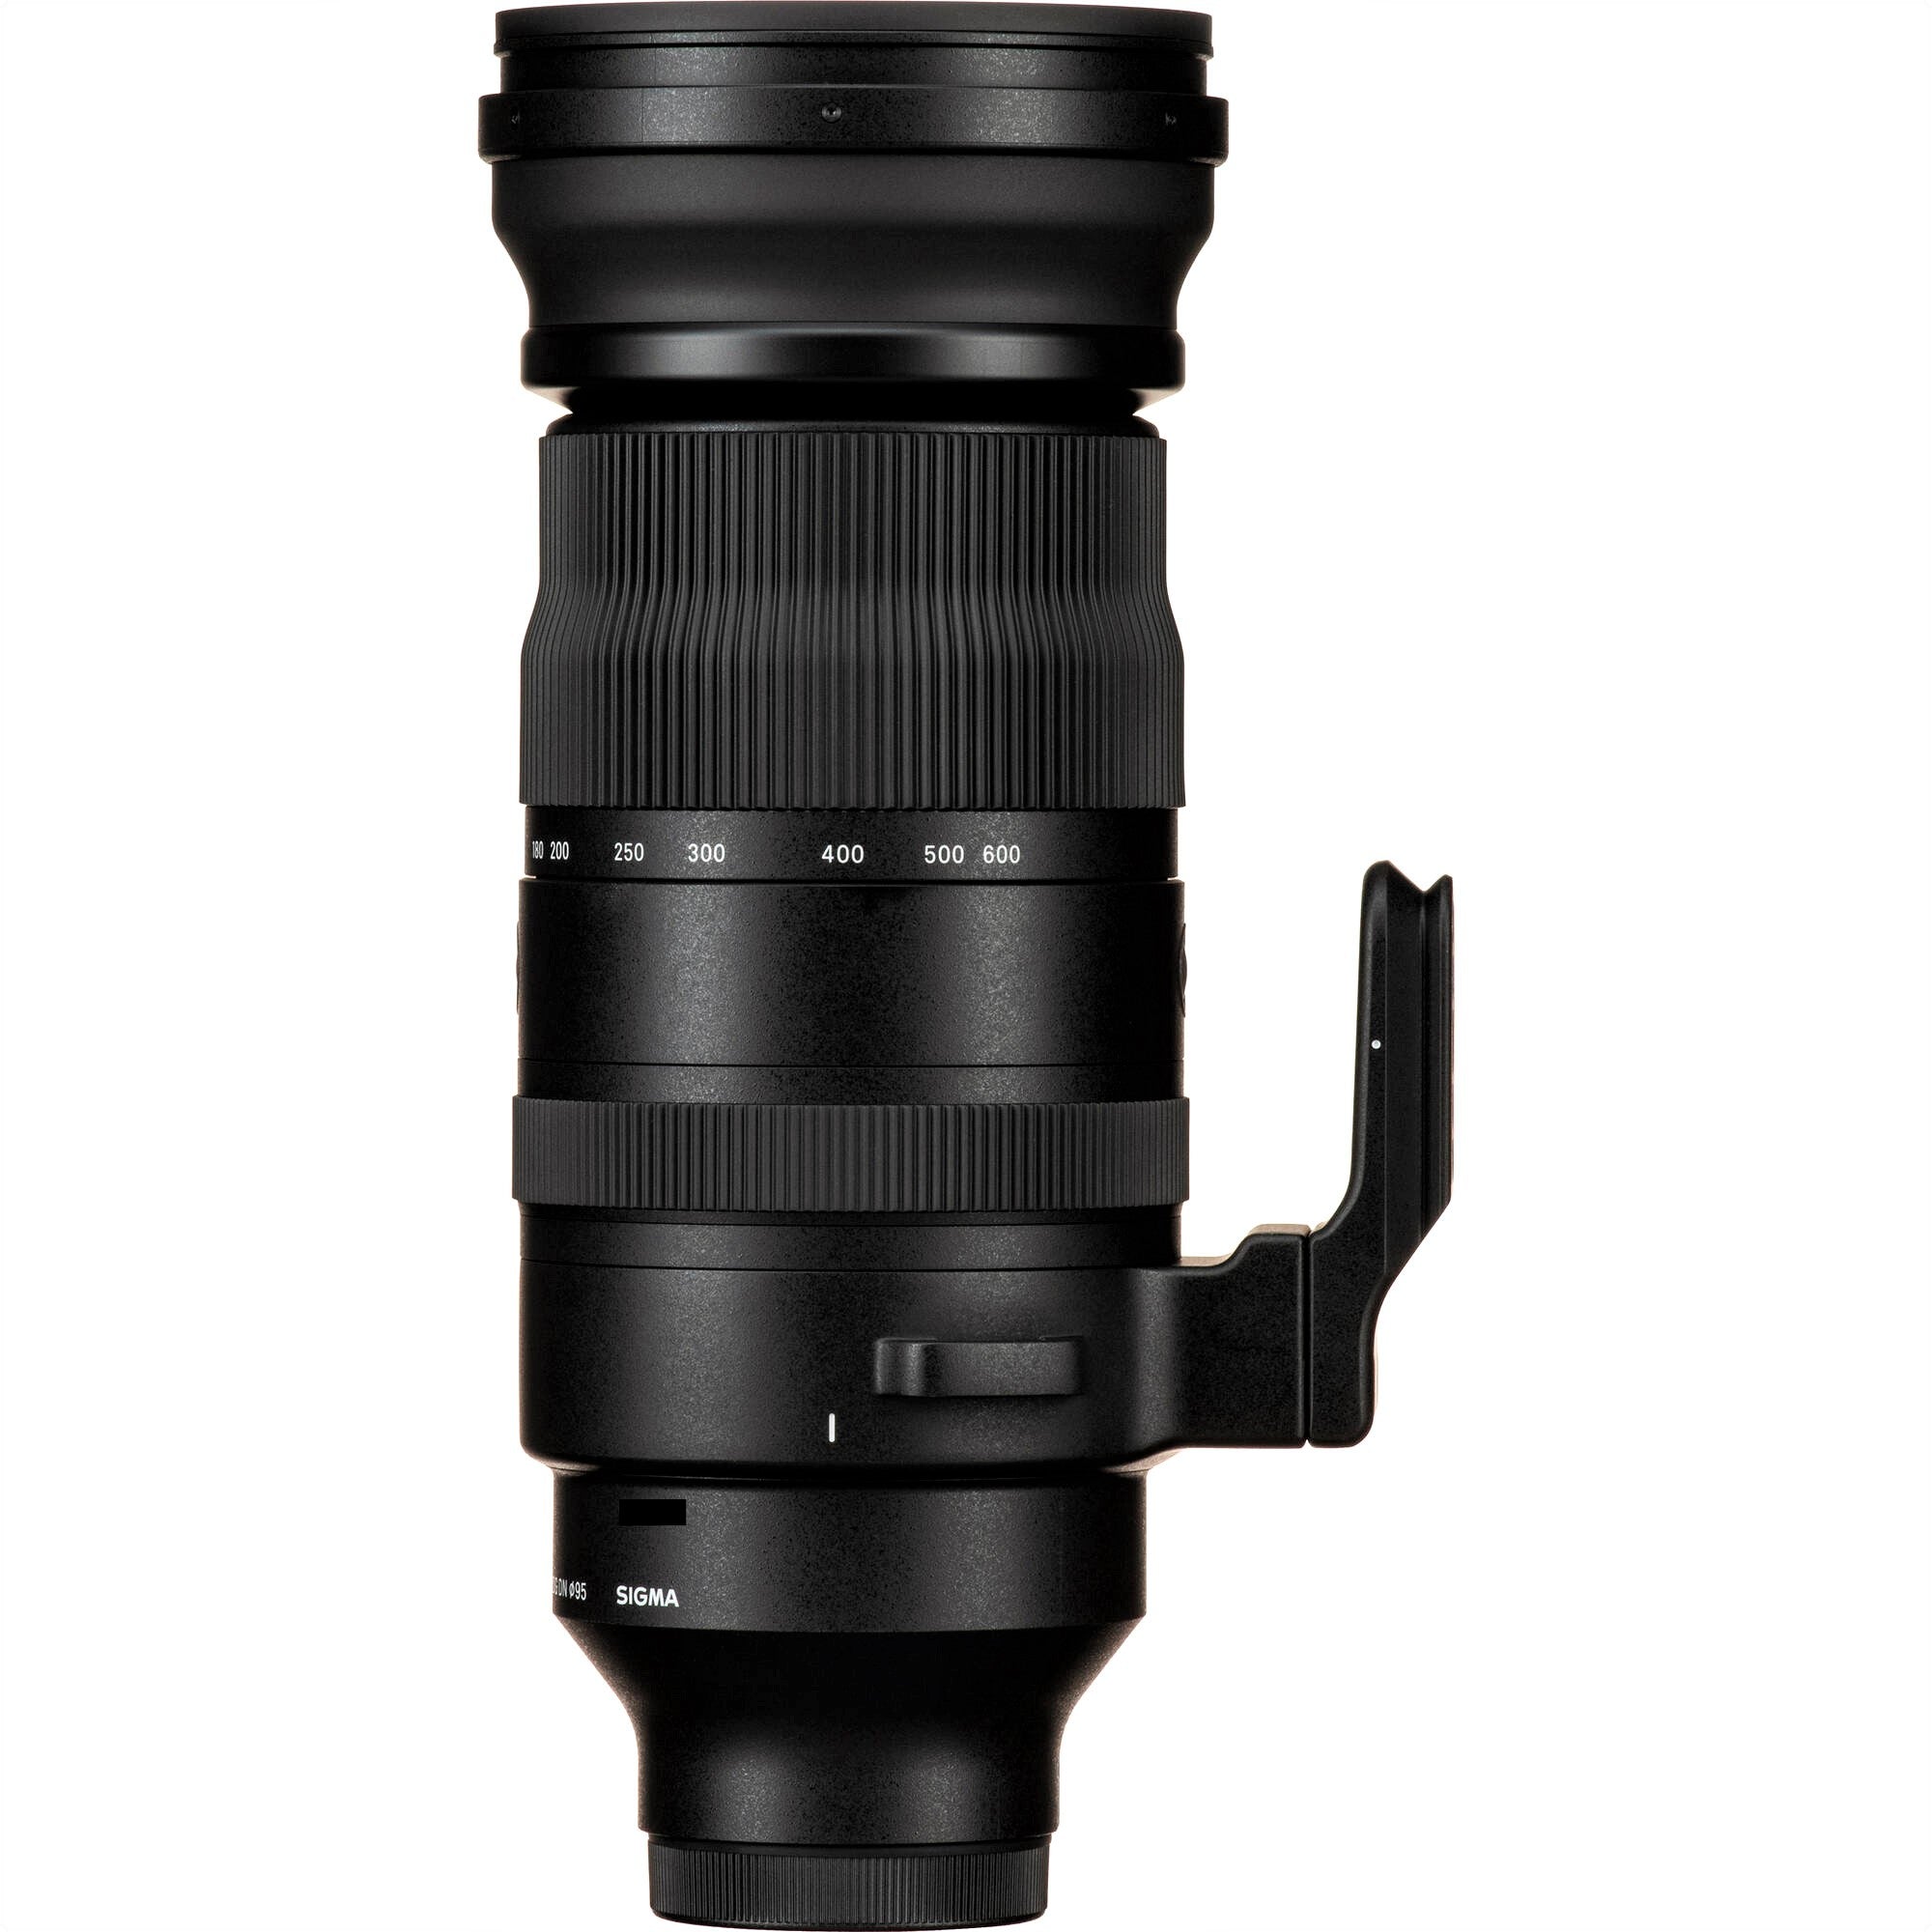 Sigma 150-600mm F5-6.3 DG DN OS Sports Lens (Sony E Mount) with Attached Tripod Socket on the Right Side